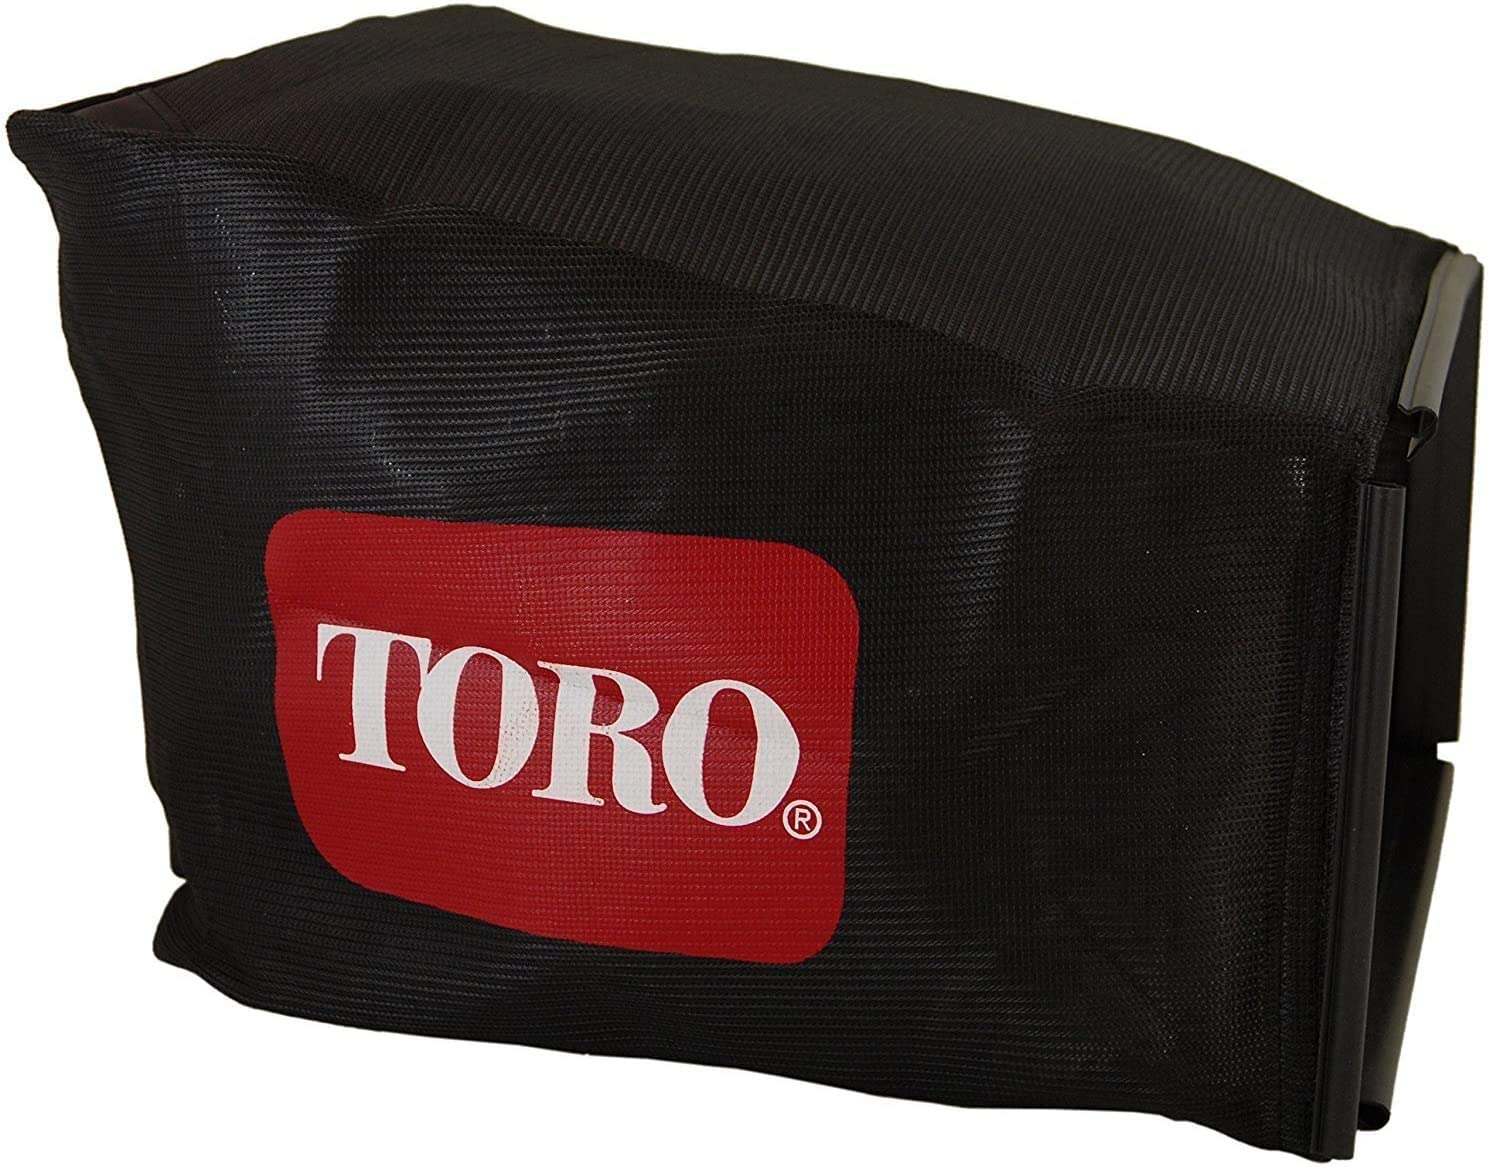 Toro 21" Super Recycler Replacement Bag (2008 & Later) #114-2664